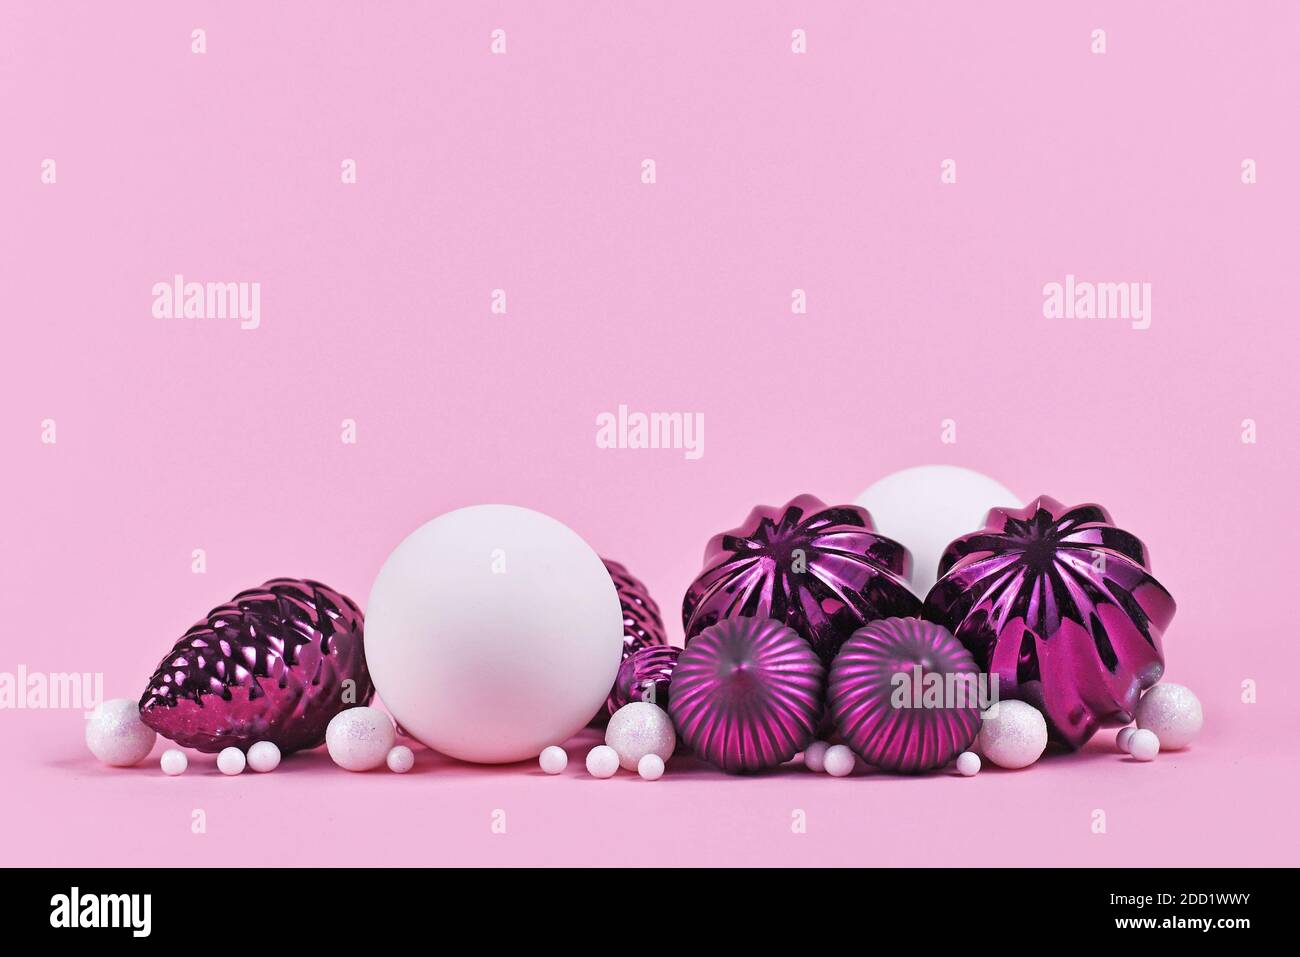 Christmas arrangement with purple and white tree ornament glass baubles on pink background with empty copy space Stock Photo